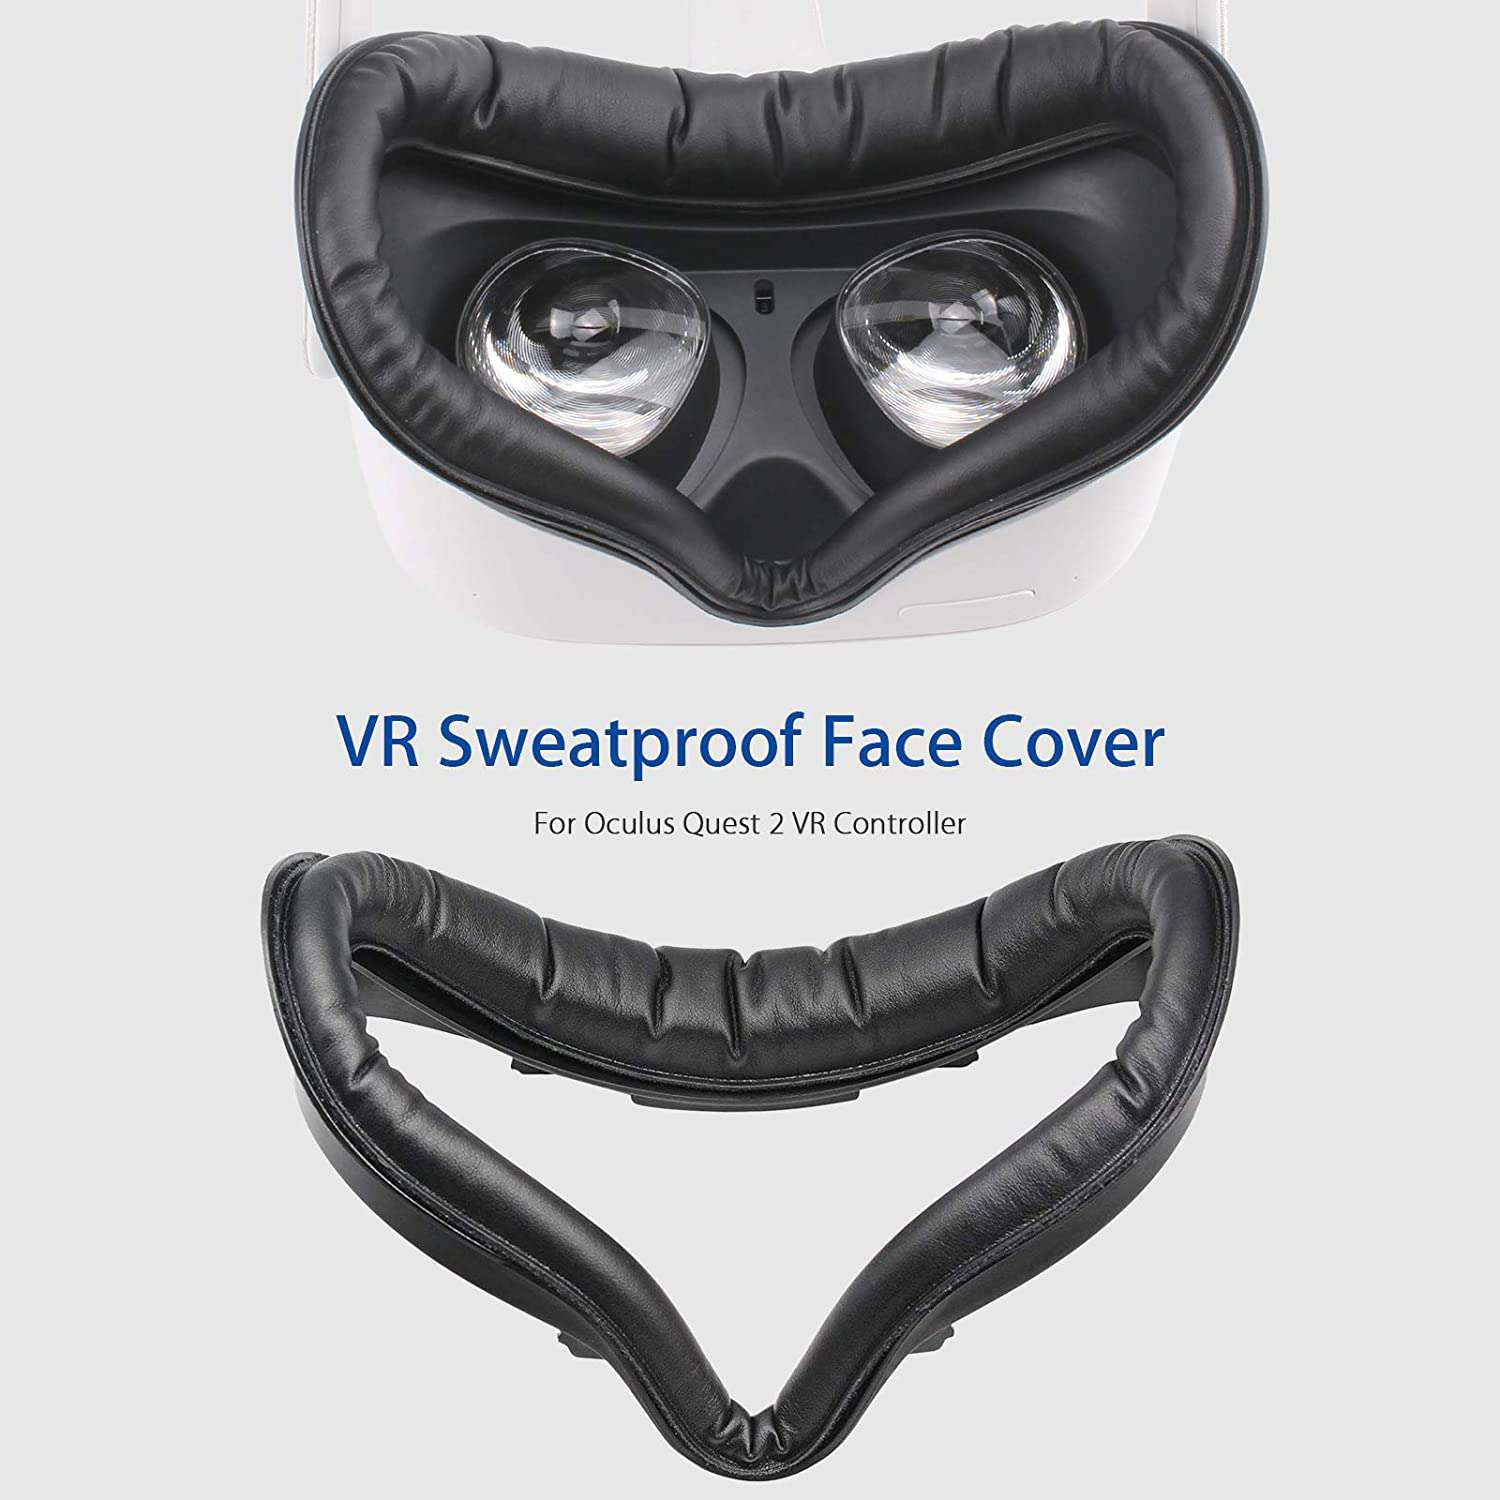 The sweat-resistant face mask is compatible with Oculus Quest 2 VR, providing a comfortable fit and preventing sweat buildup